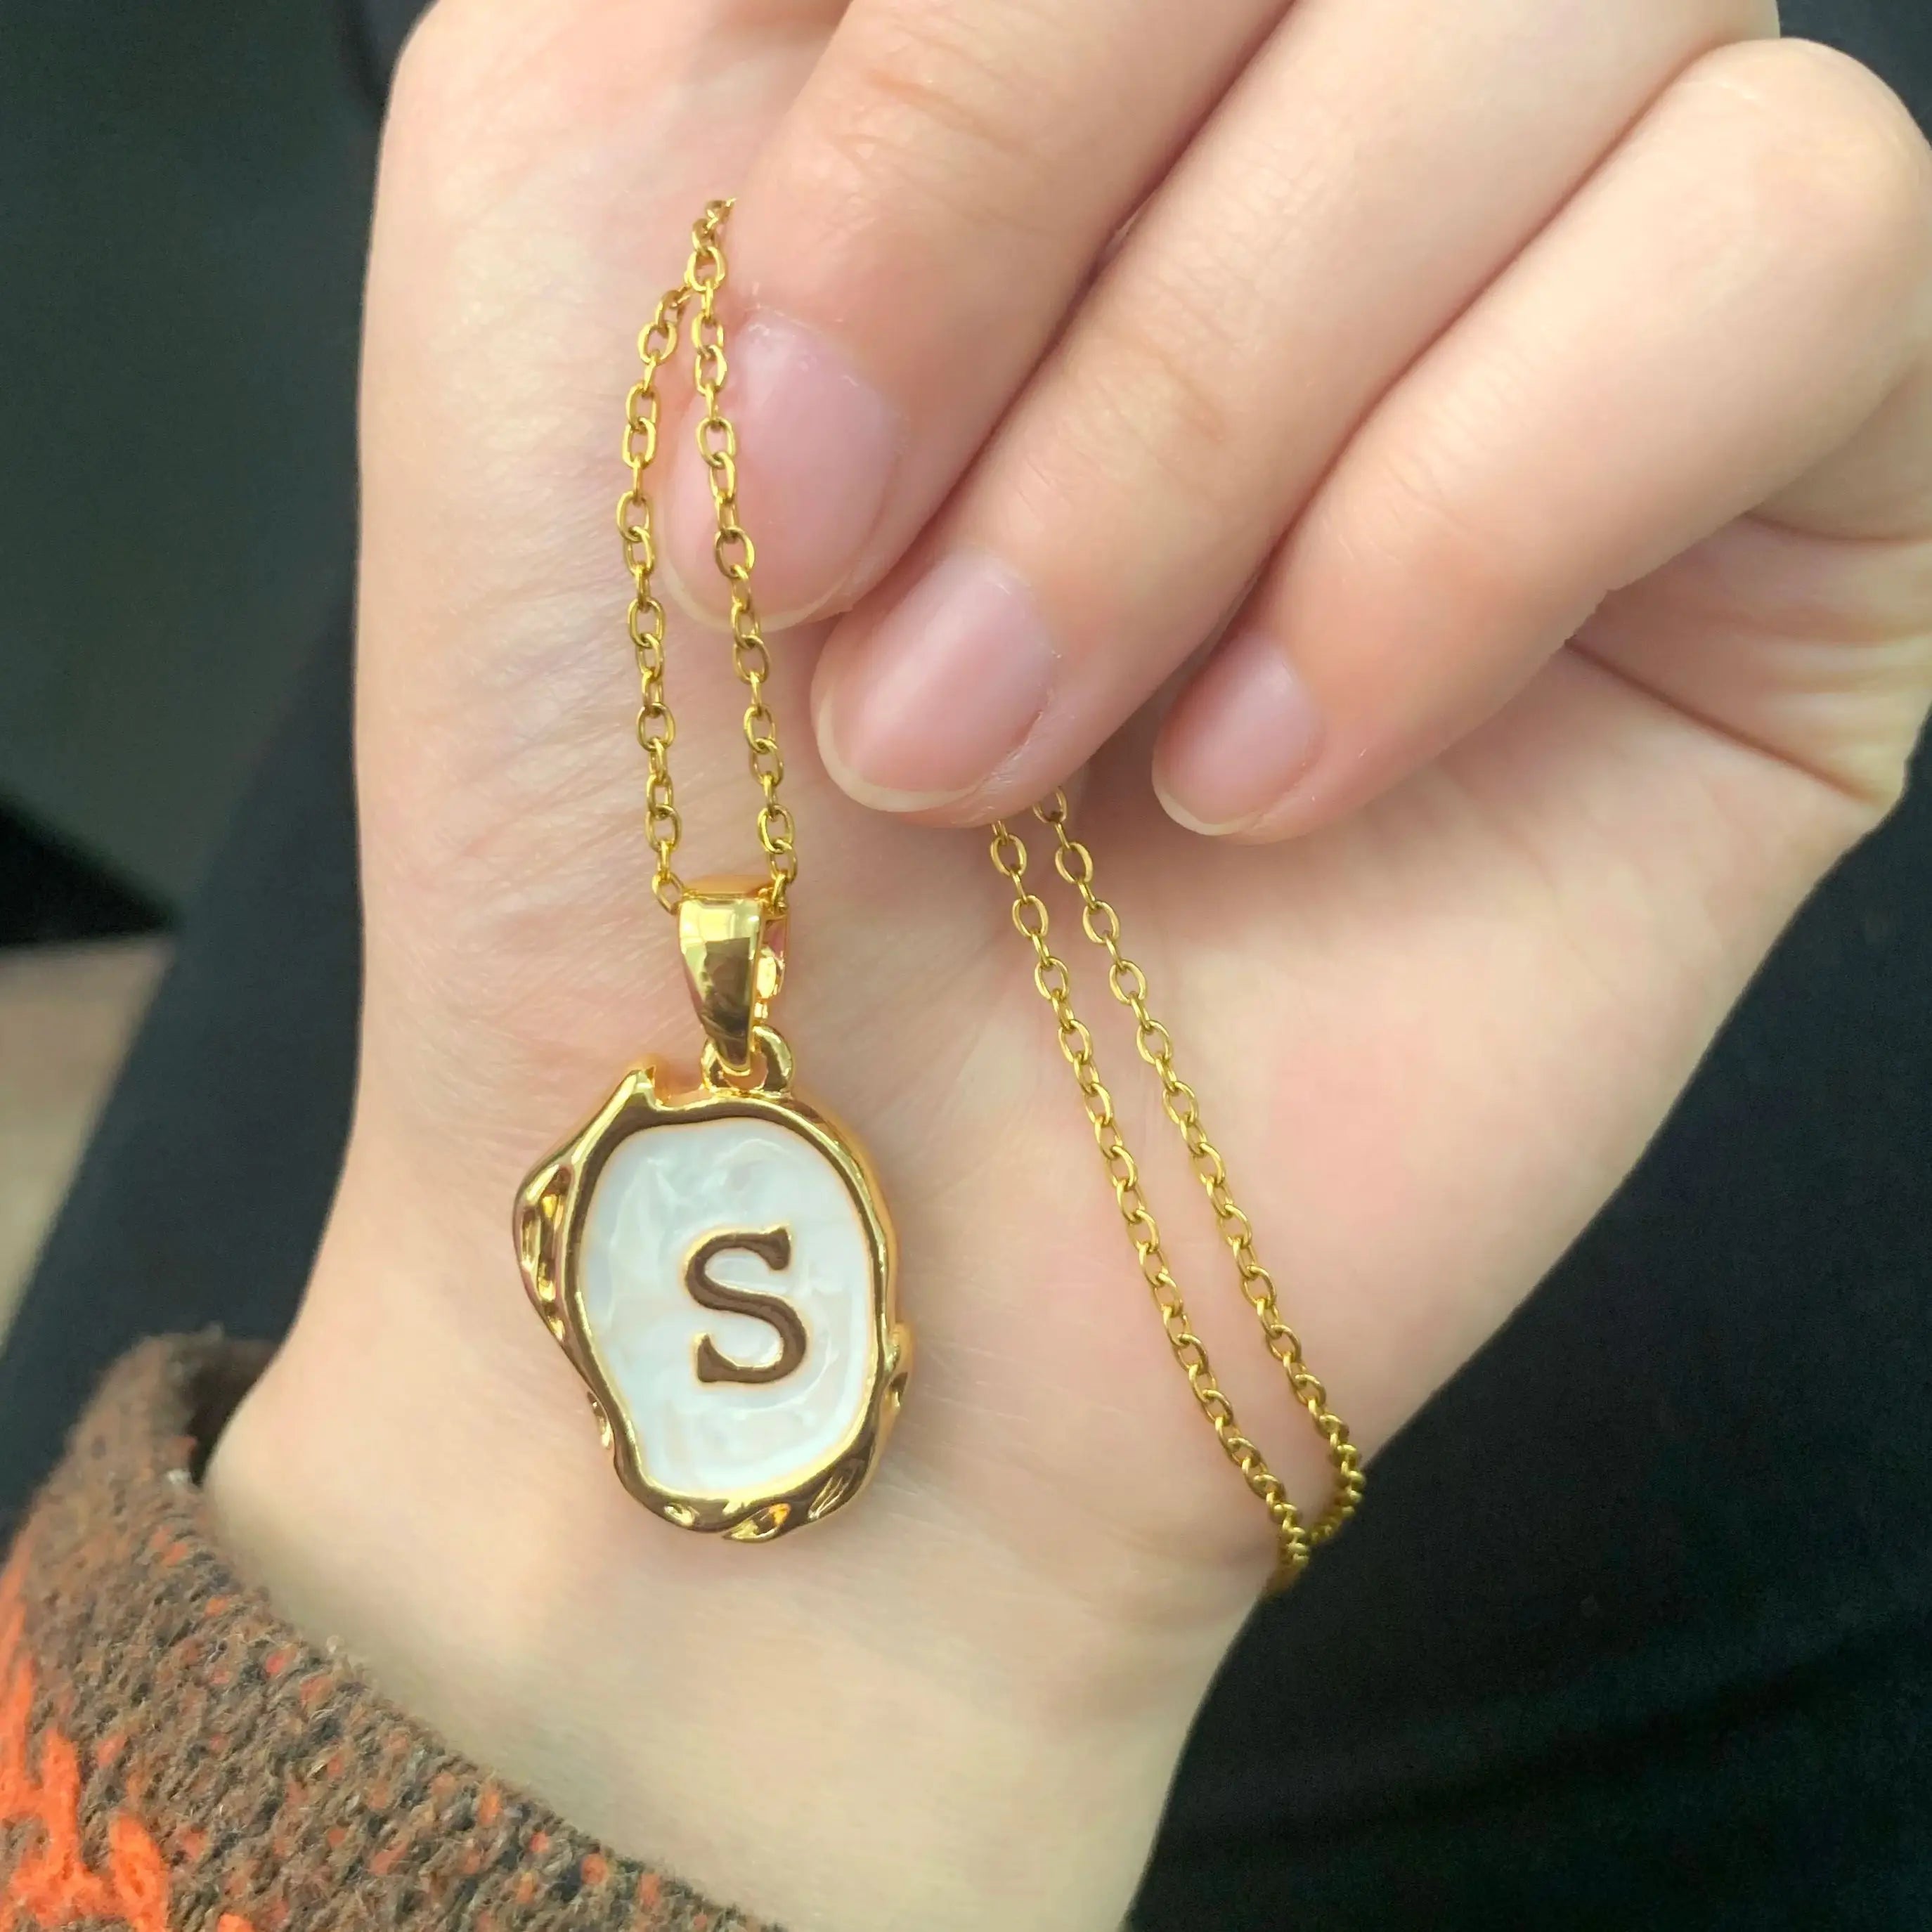 Lovely Necklace with Initials from the Bottom of the Sea in 18K Gold Plating